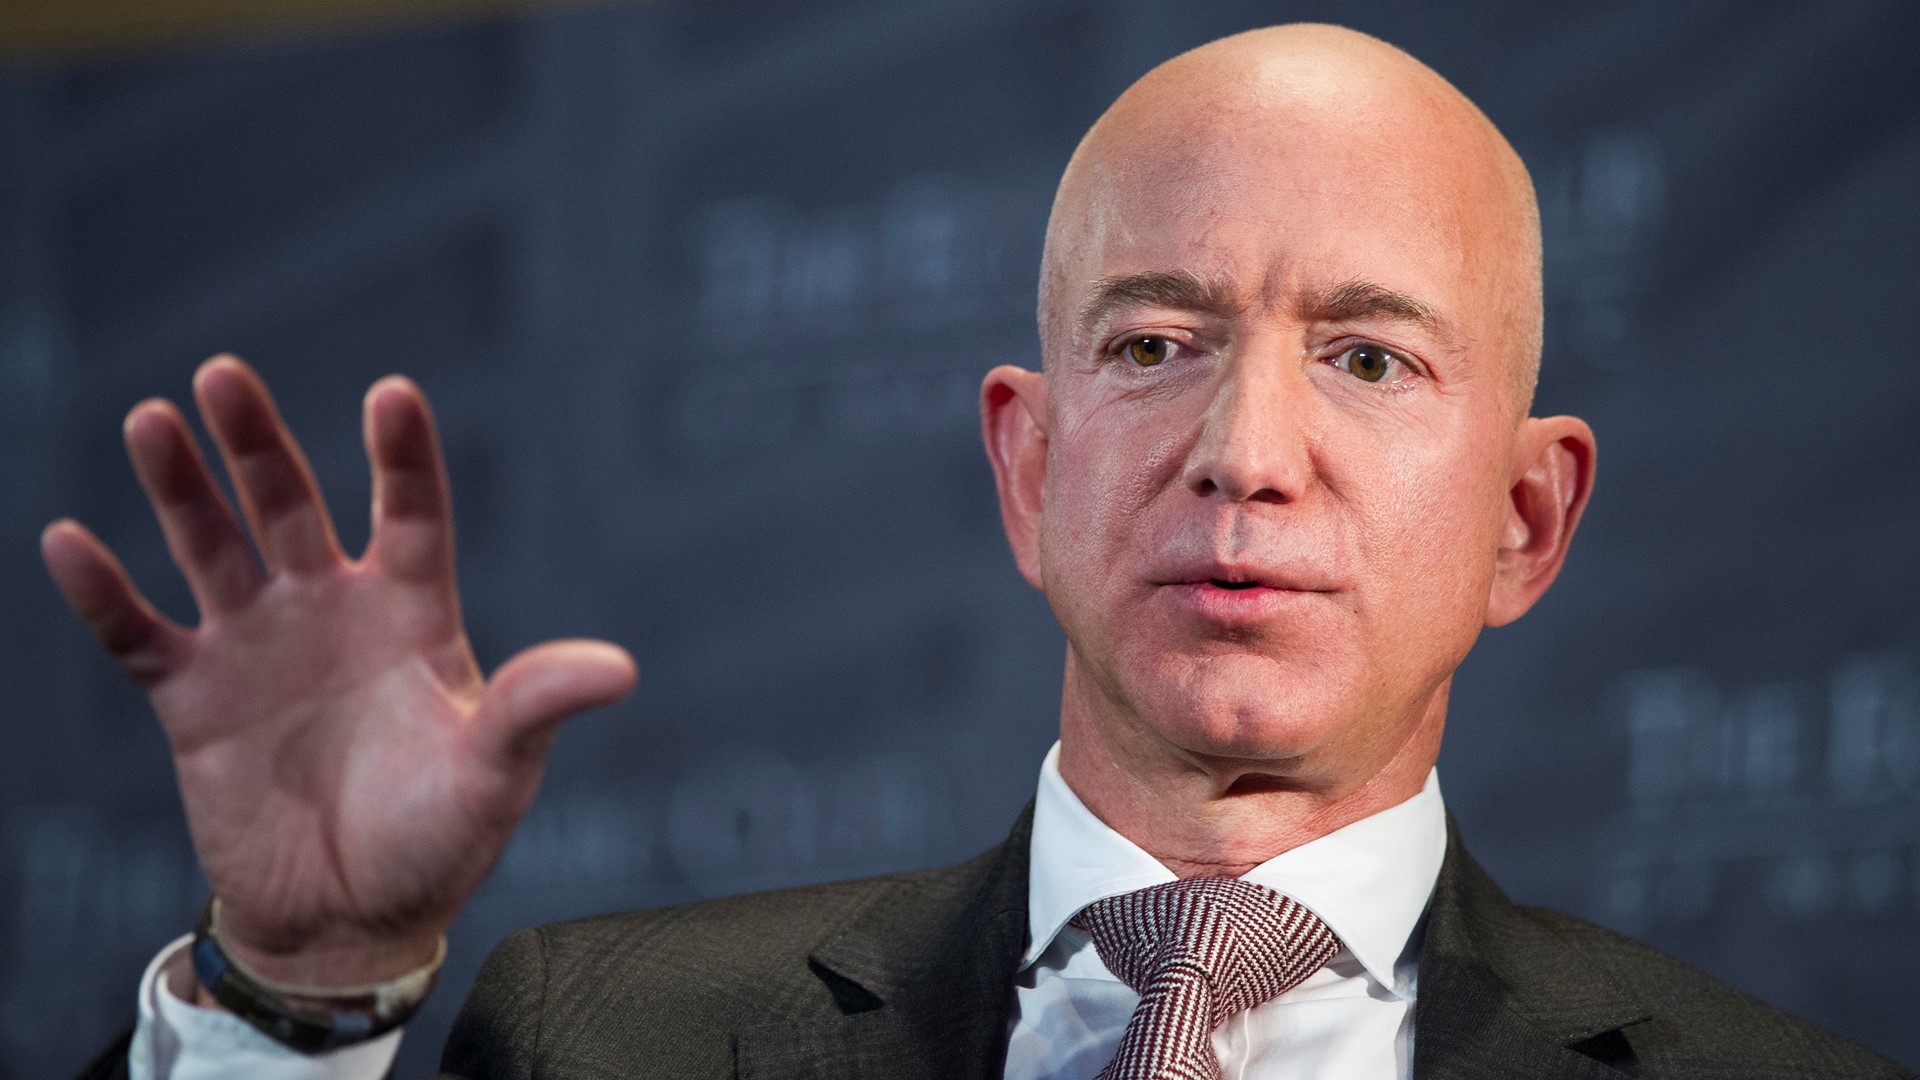 Members of House Judiciary Committee wants Amazon founder and CEO Jeff Bezos to testify on how the company uses data of third-party sellers.